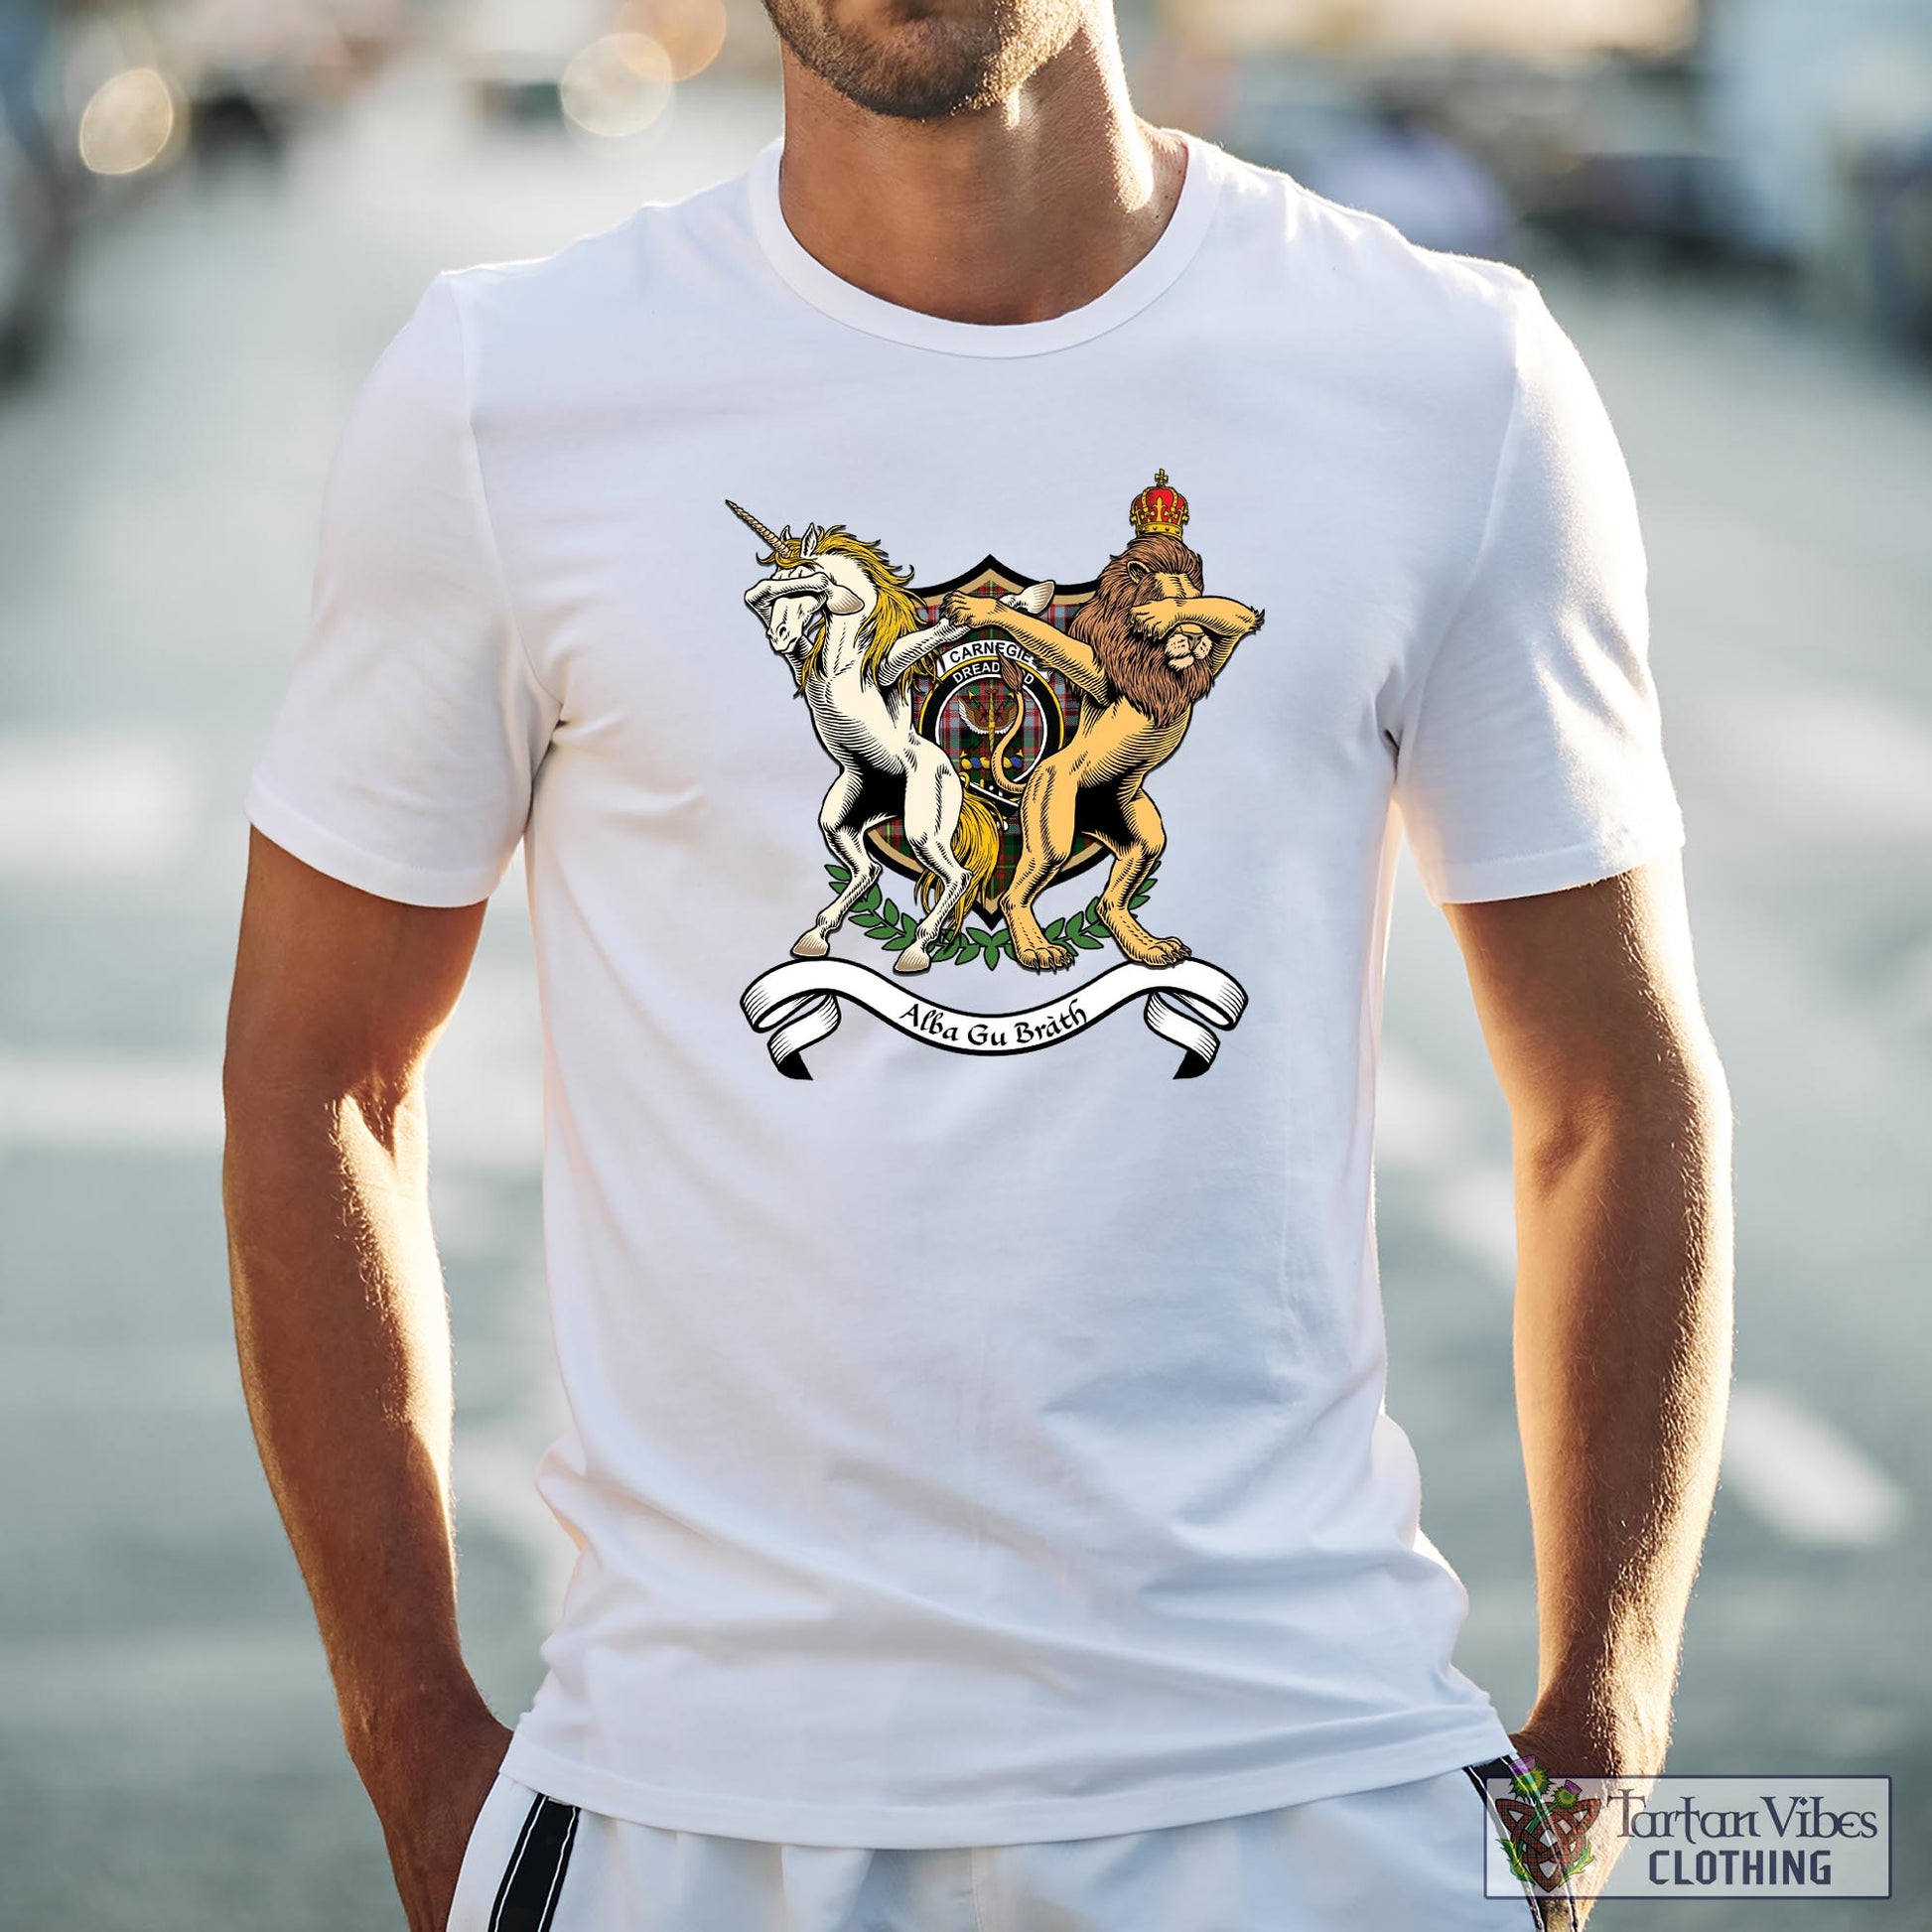 Tartan Vibes Clothing Carnegie Dress Family Crest Cotton Men's T-Shirt with Scotland Royal Coat Of Arm Funny Style